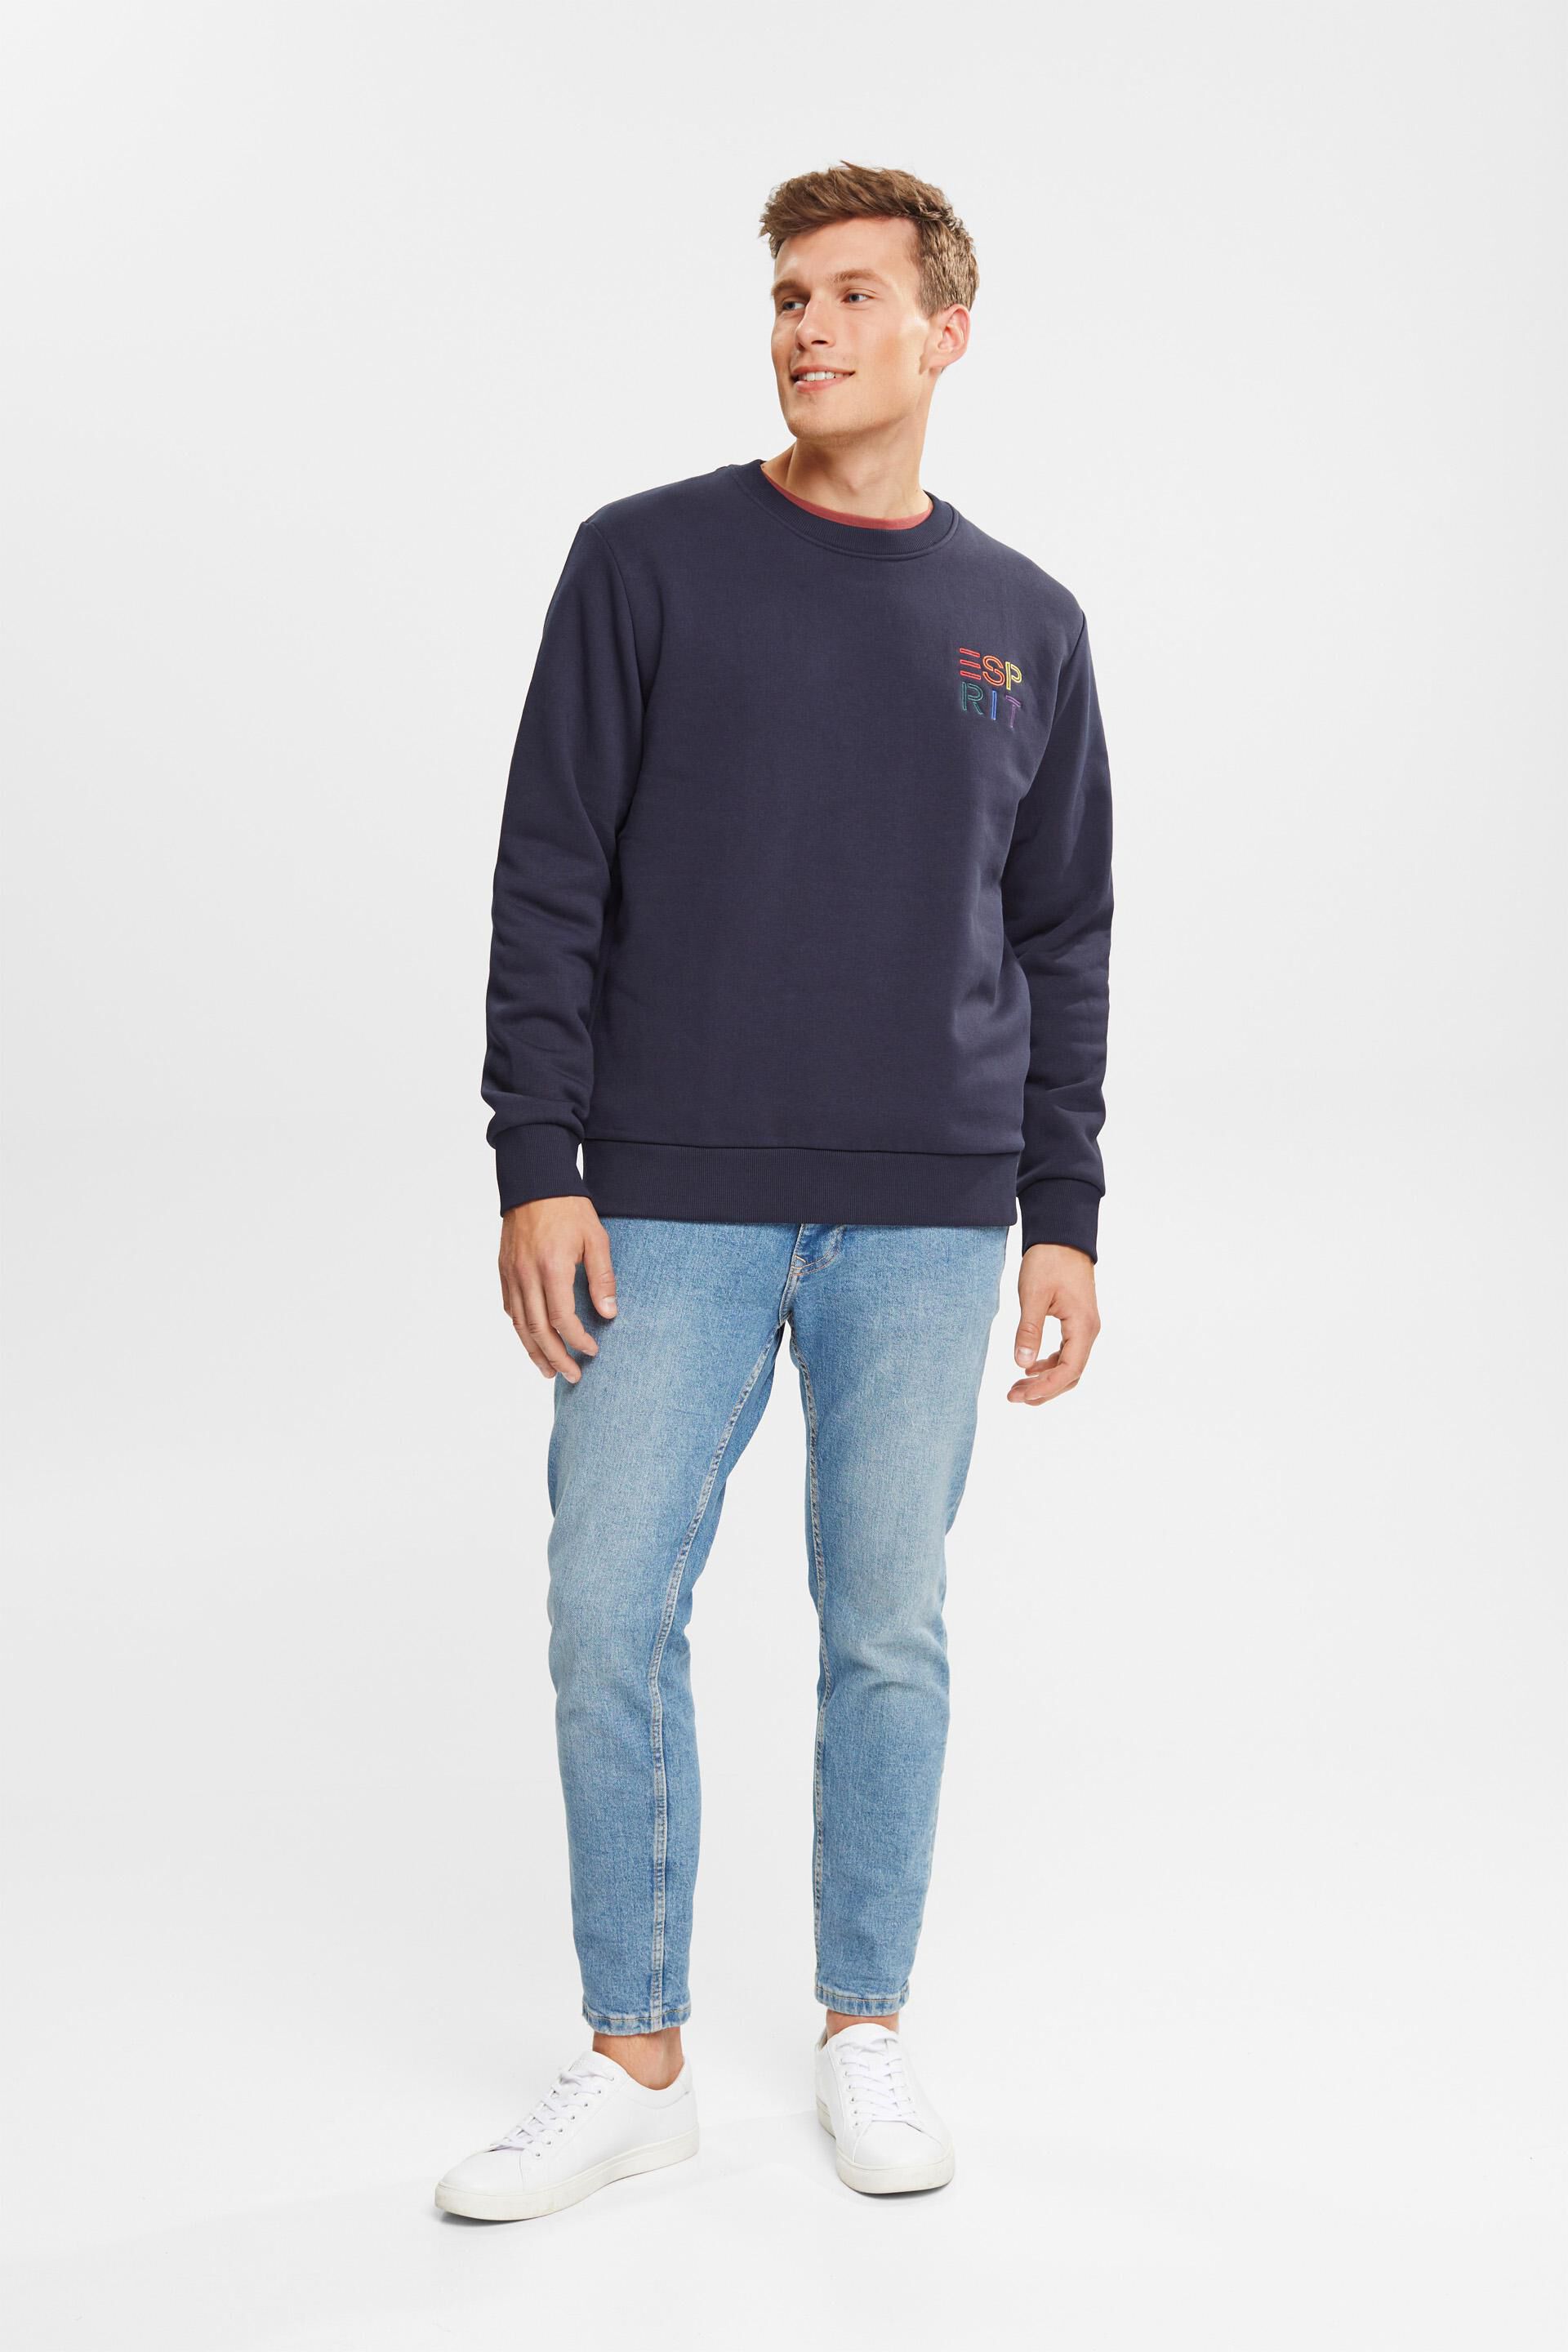 Esprit colourful logo with Sweatshirt a embroidered